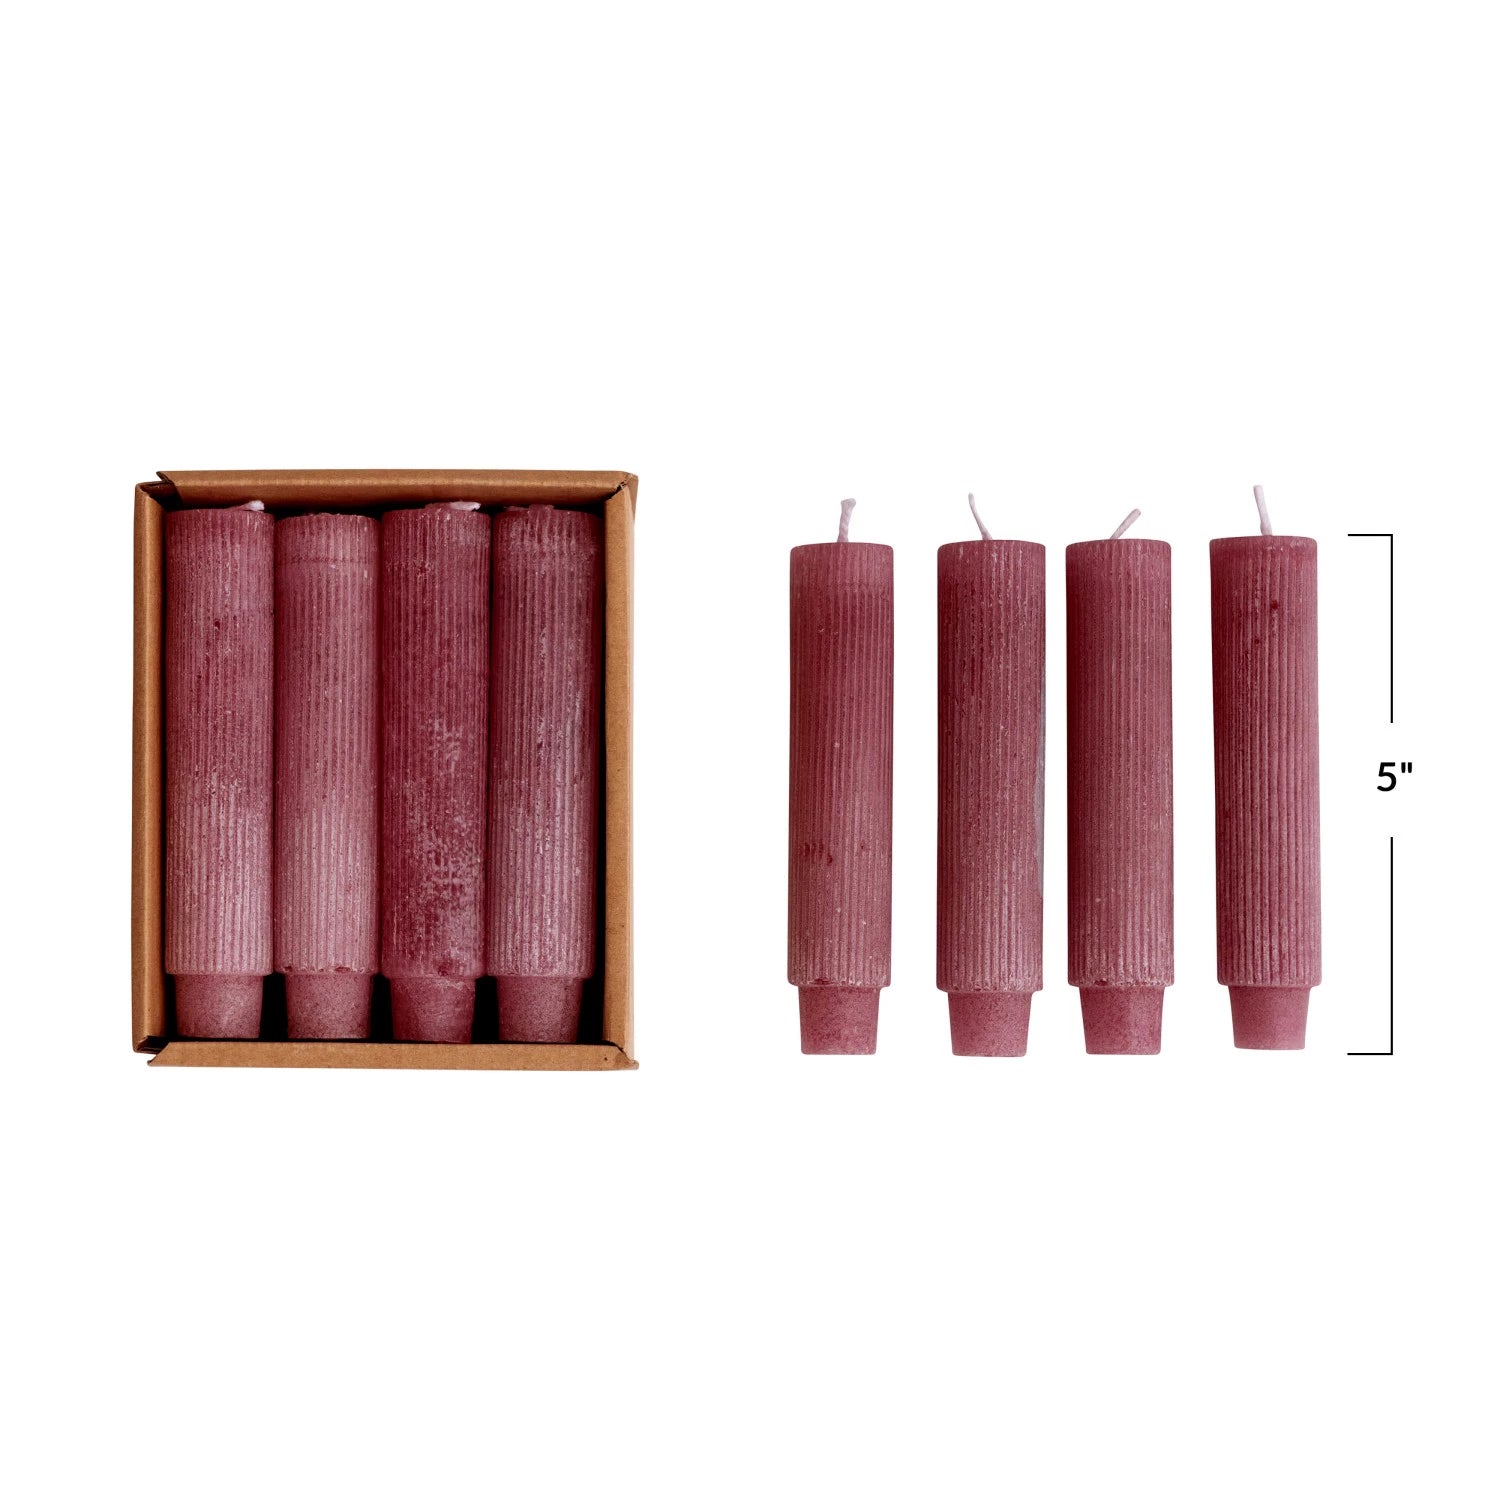 Cabernet 5"H Unscented Pleated Taper Candles in Box